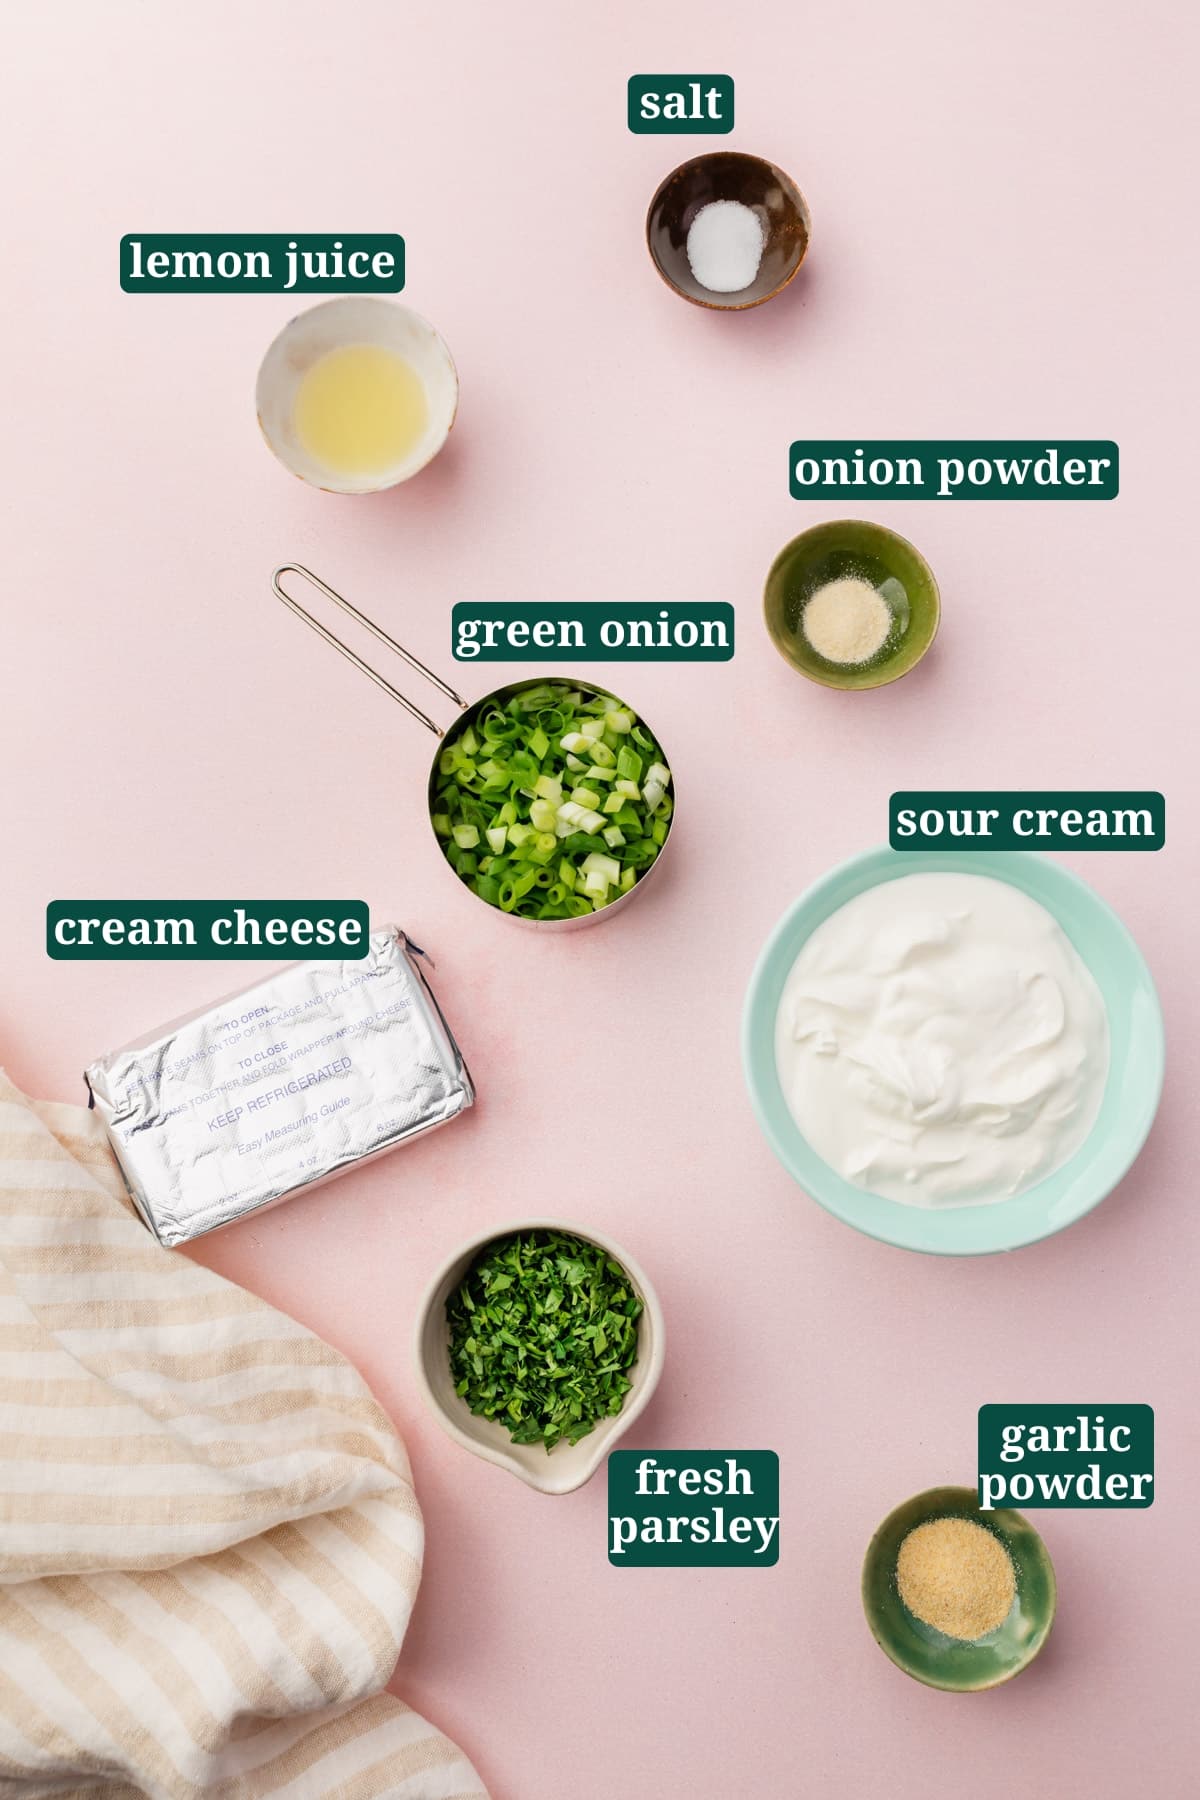 Small ingredients in bowls on a pink table for making green onion dip, including lemon juice, fresh parsley, green onions, cream cheese, sour cream, onion powder, garlic powder, and salt with a text overlay over each ingredient.